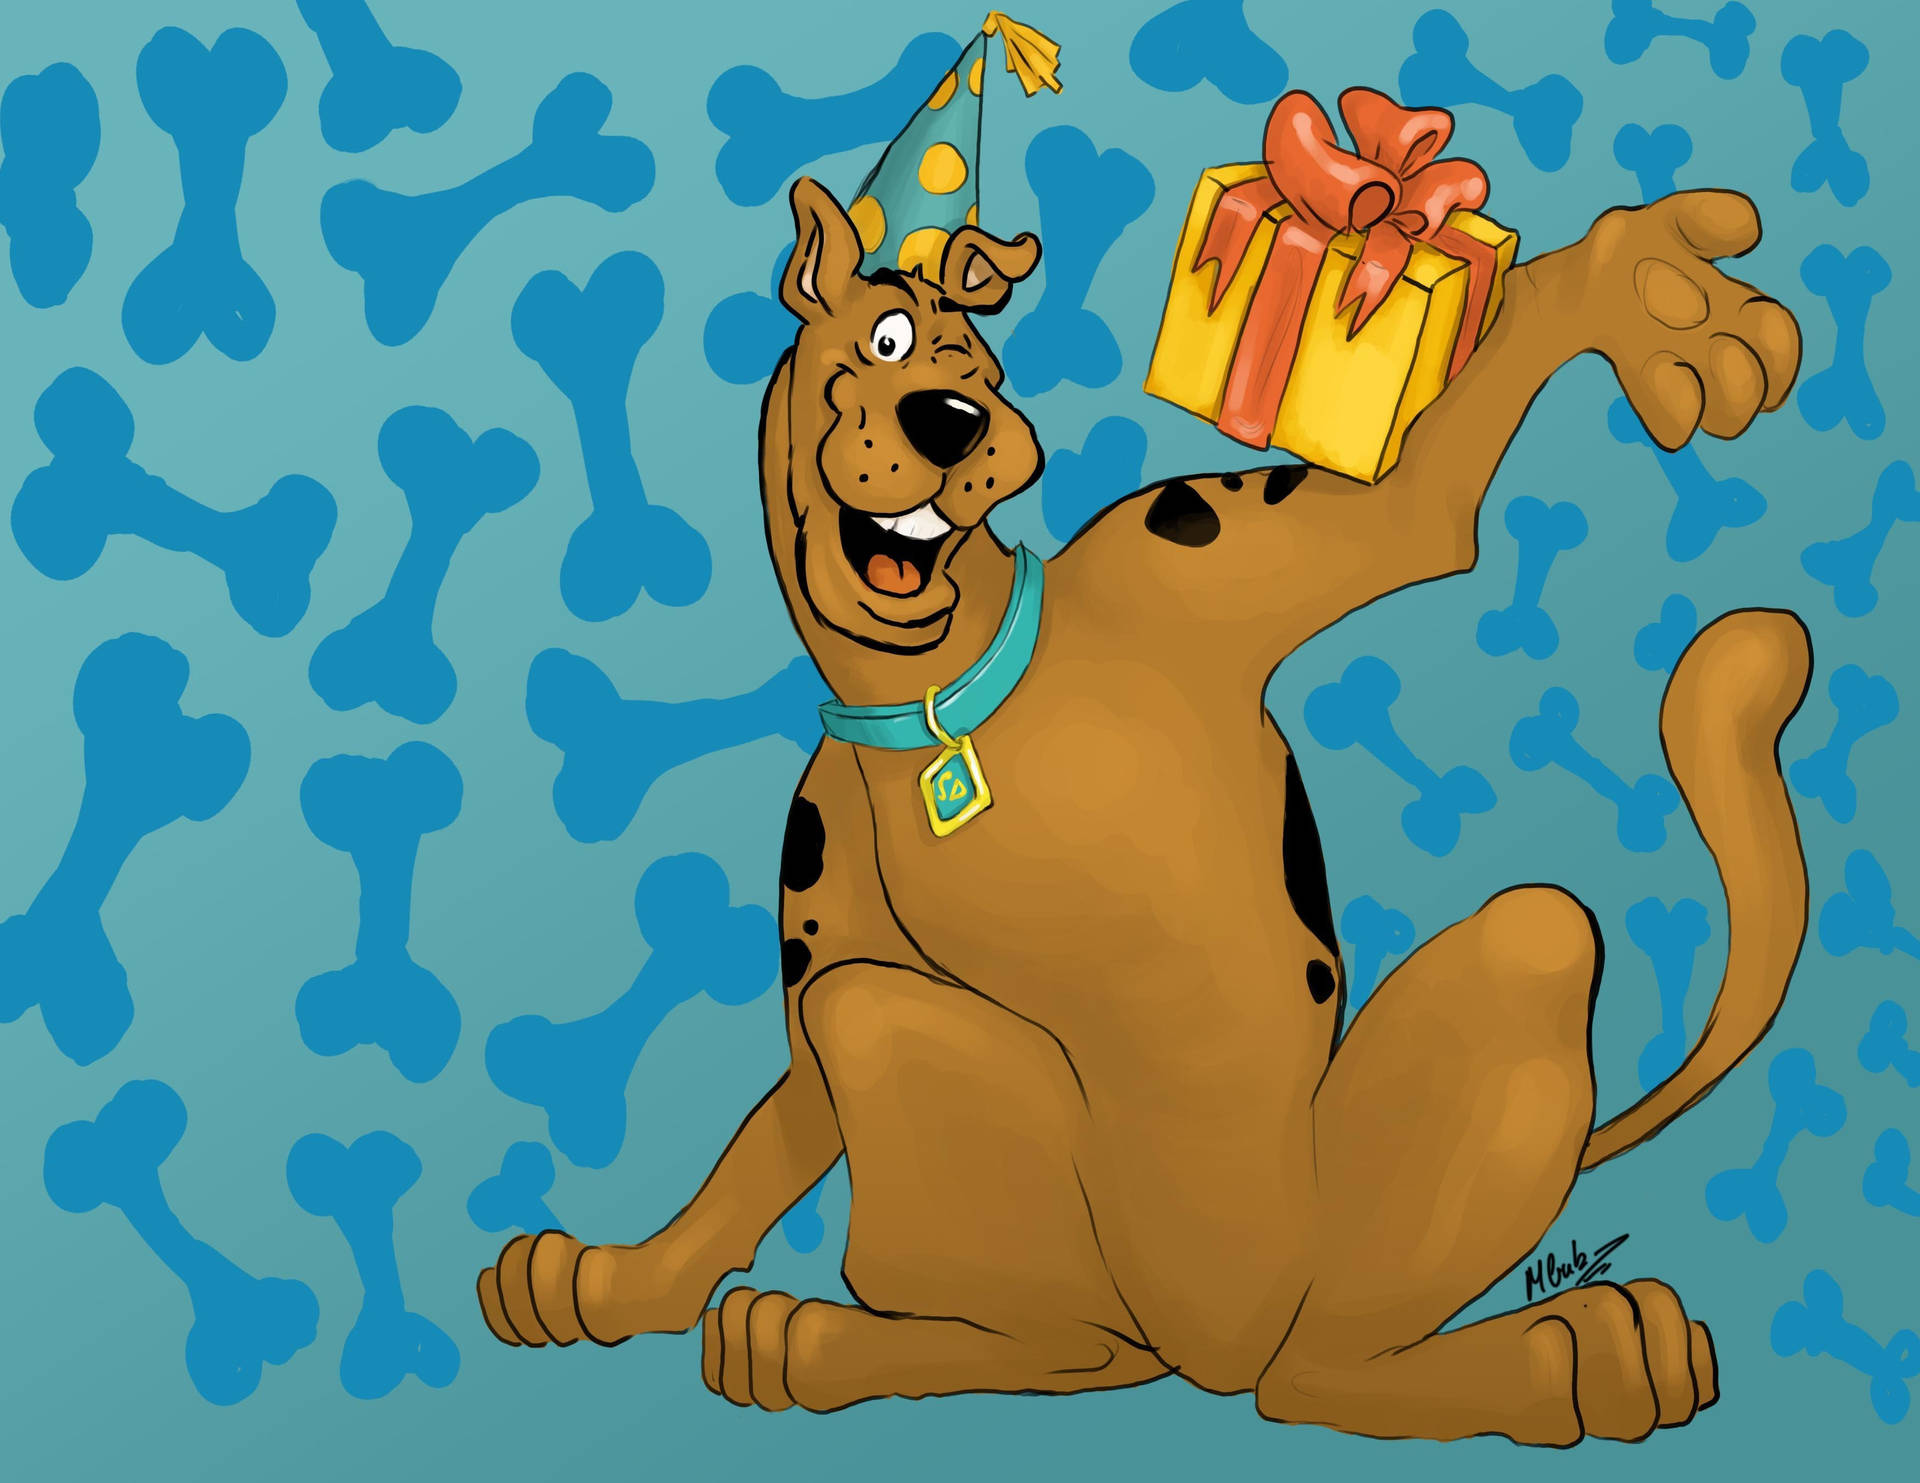 Scooby Doo With A Gift Background